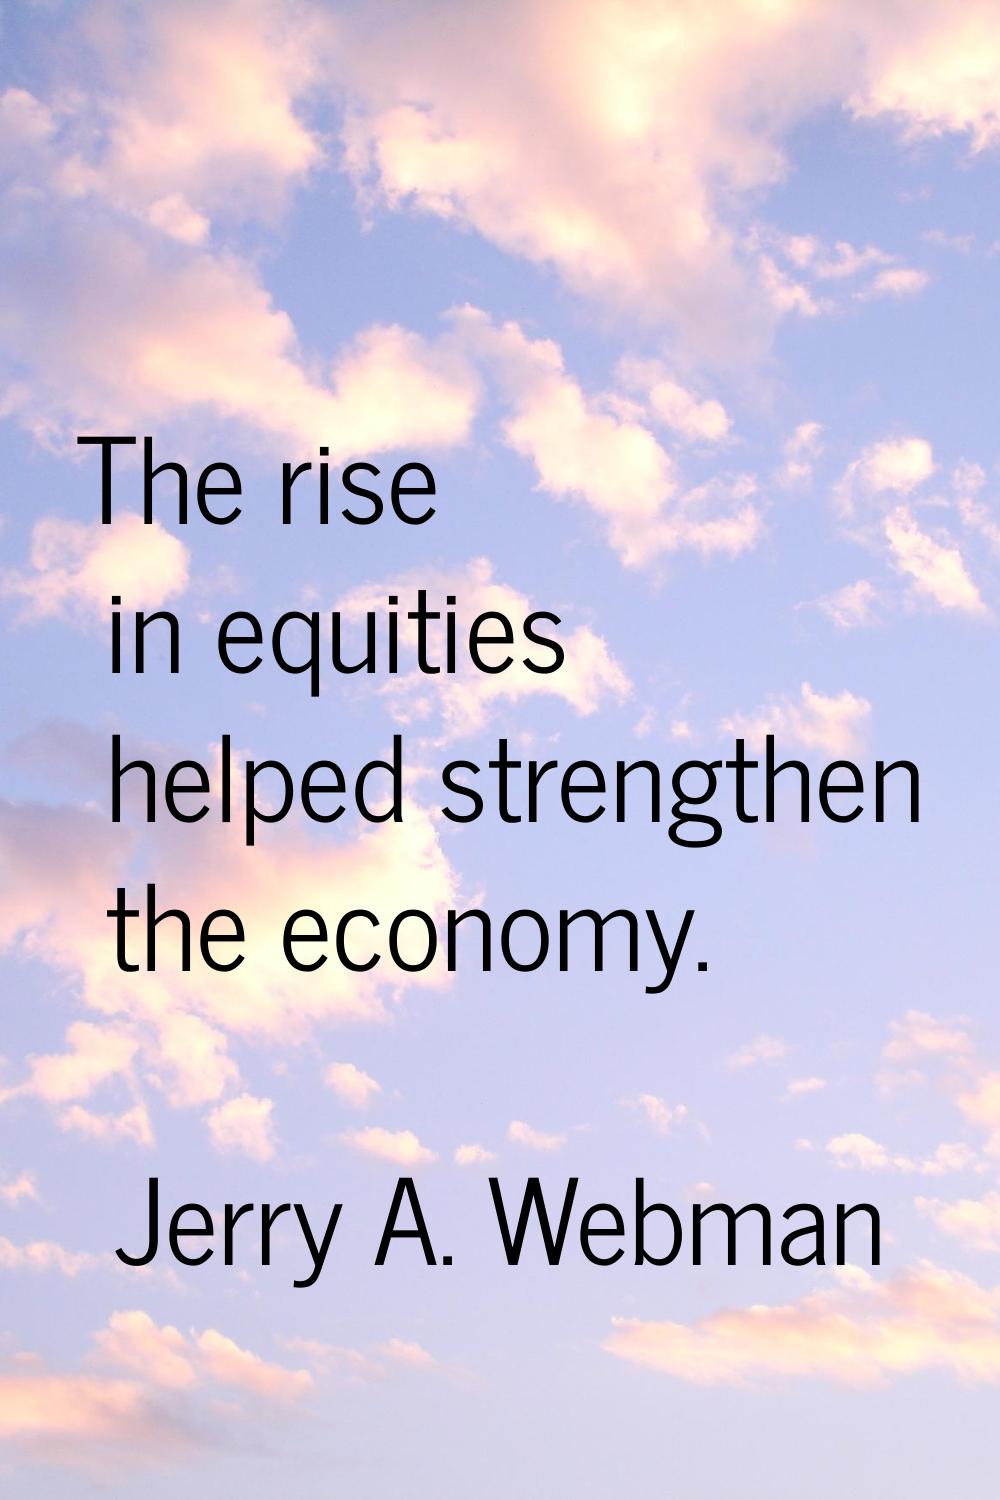 The rise in equities helped strengthen the economy.